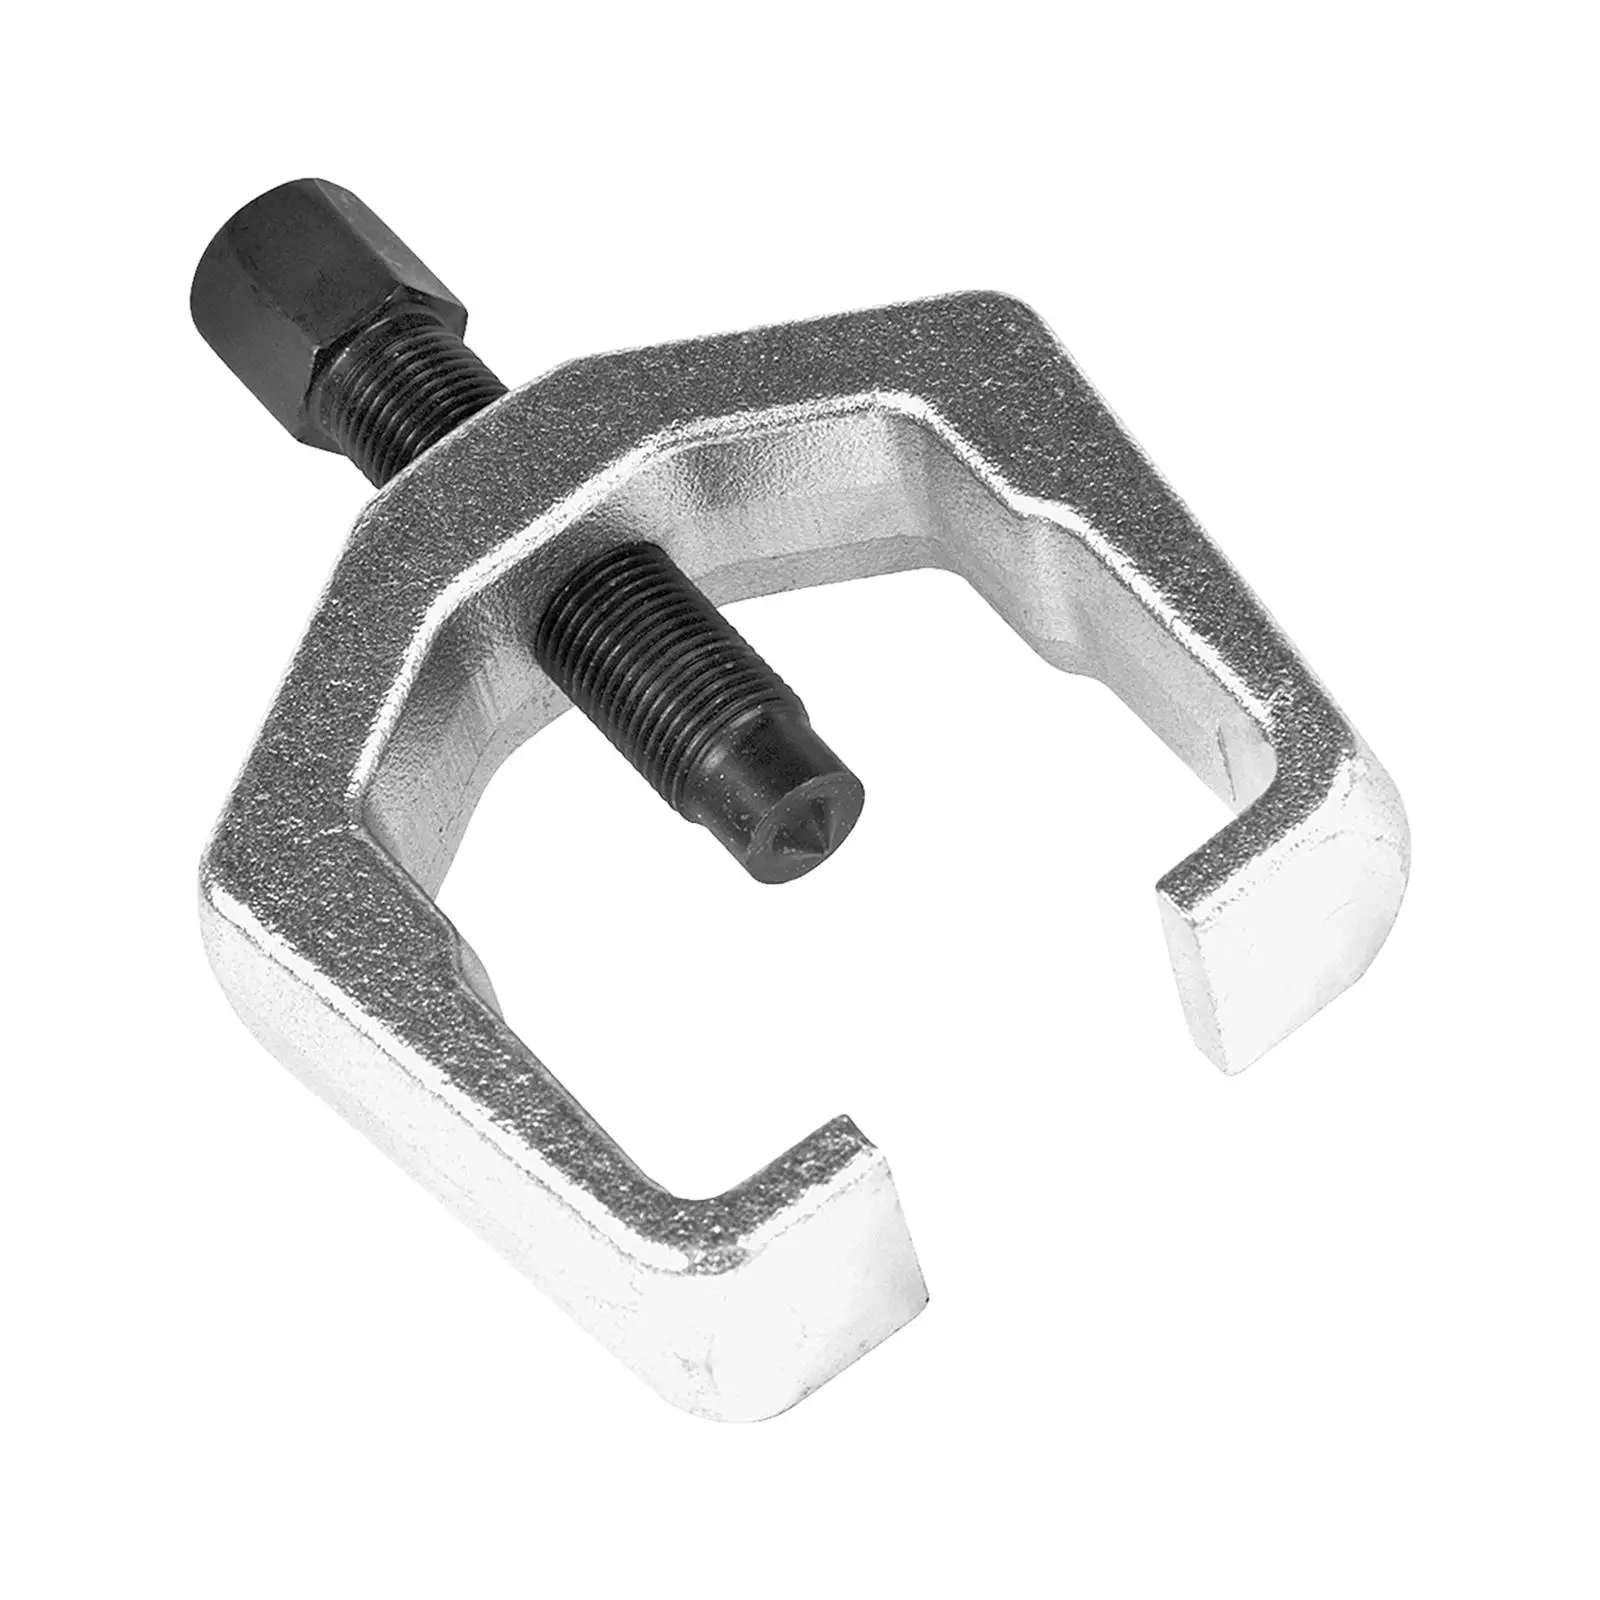 Slack Adjuster Puller Trailers High Performance 2 Jaw Gear Puller Removal Tool for Gears Sturdy Maintenance Tool Remover Tool